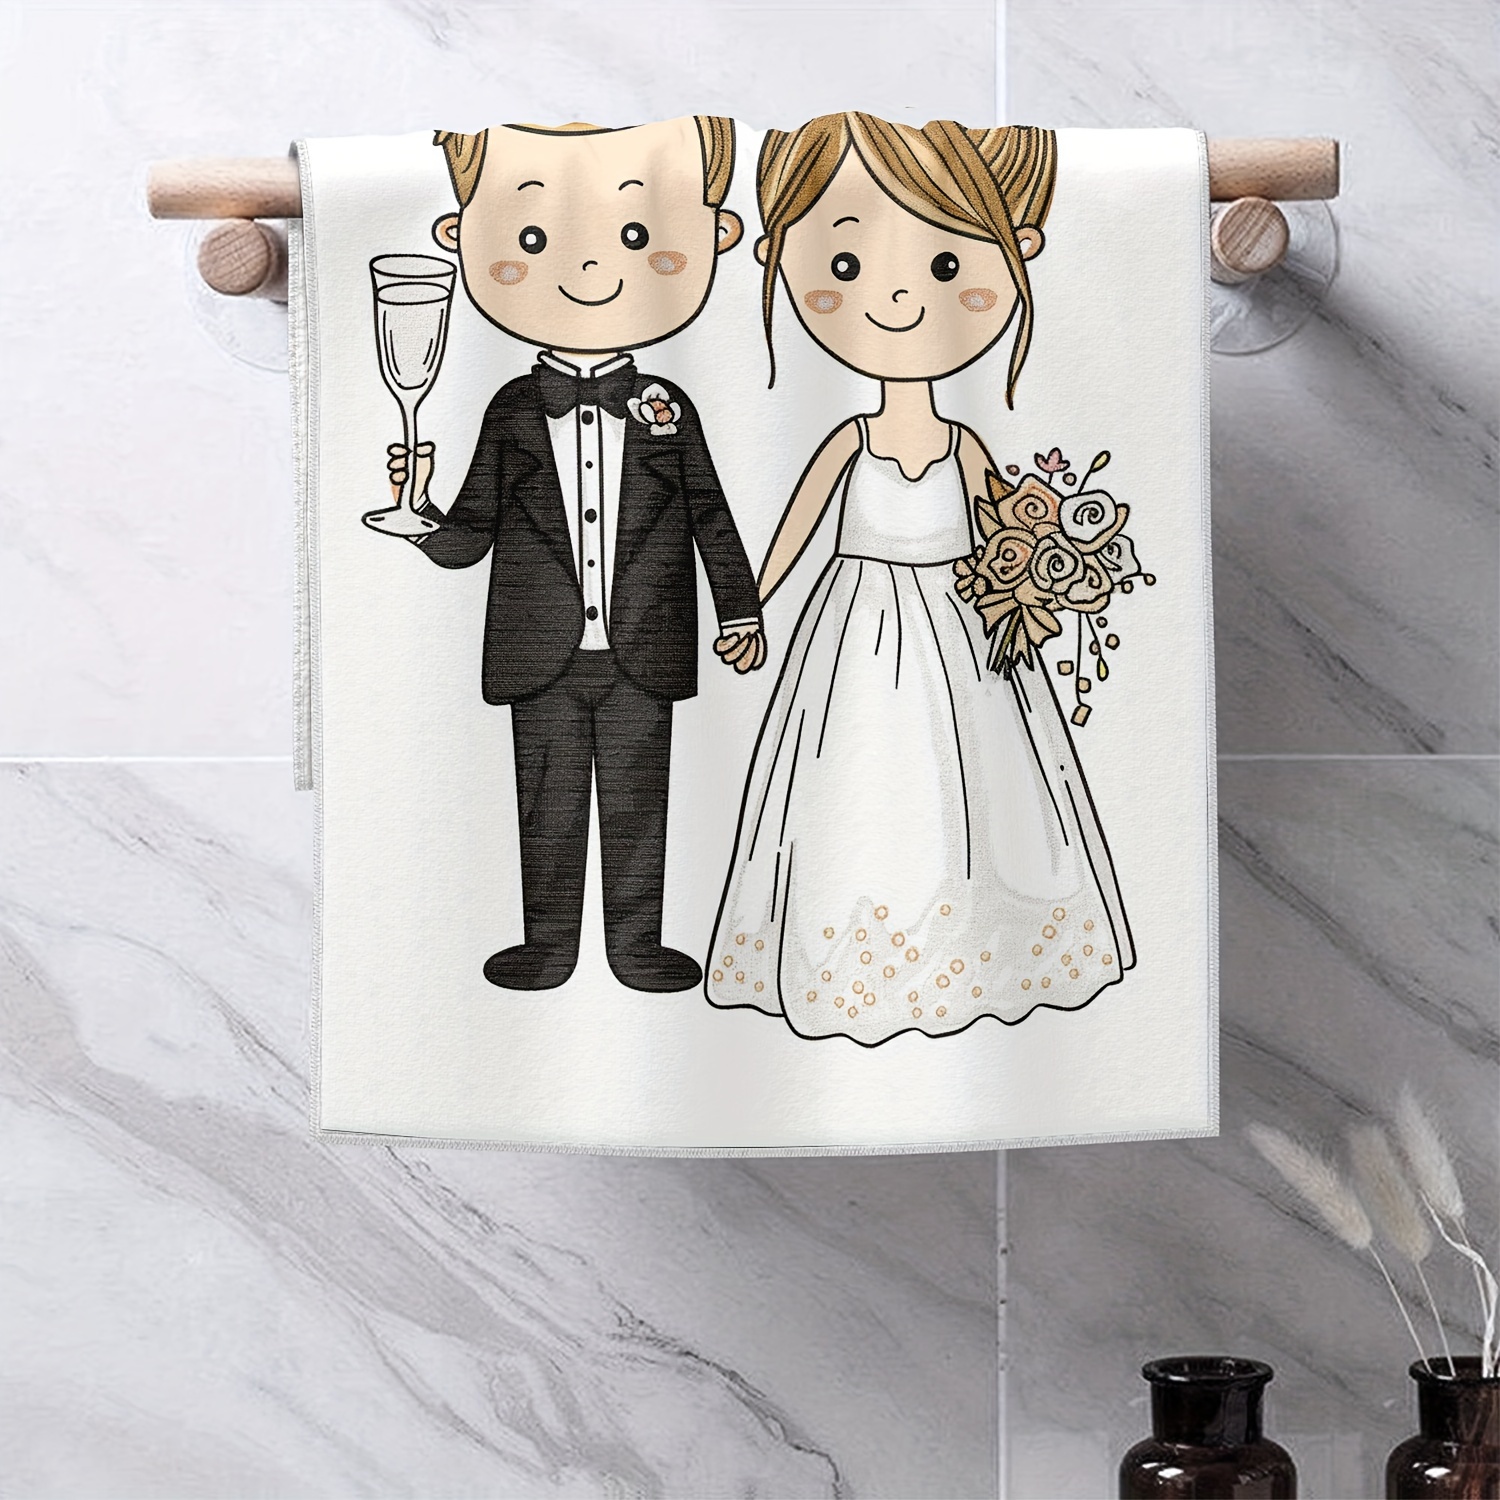 

2pcs, Microfiber Kitchen Dish Towels, Wedding Season Theme, Cartoon Bride And Groom Design, Contemporary Style, Cleaning Cloths, Home Decor, Housewarming Gifts, Kitchen Supplies, Cleaning Tools